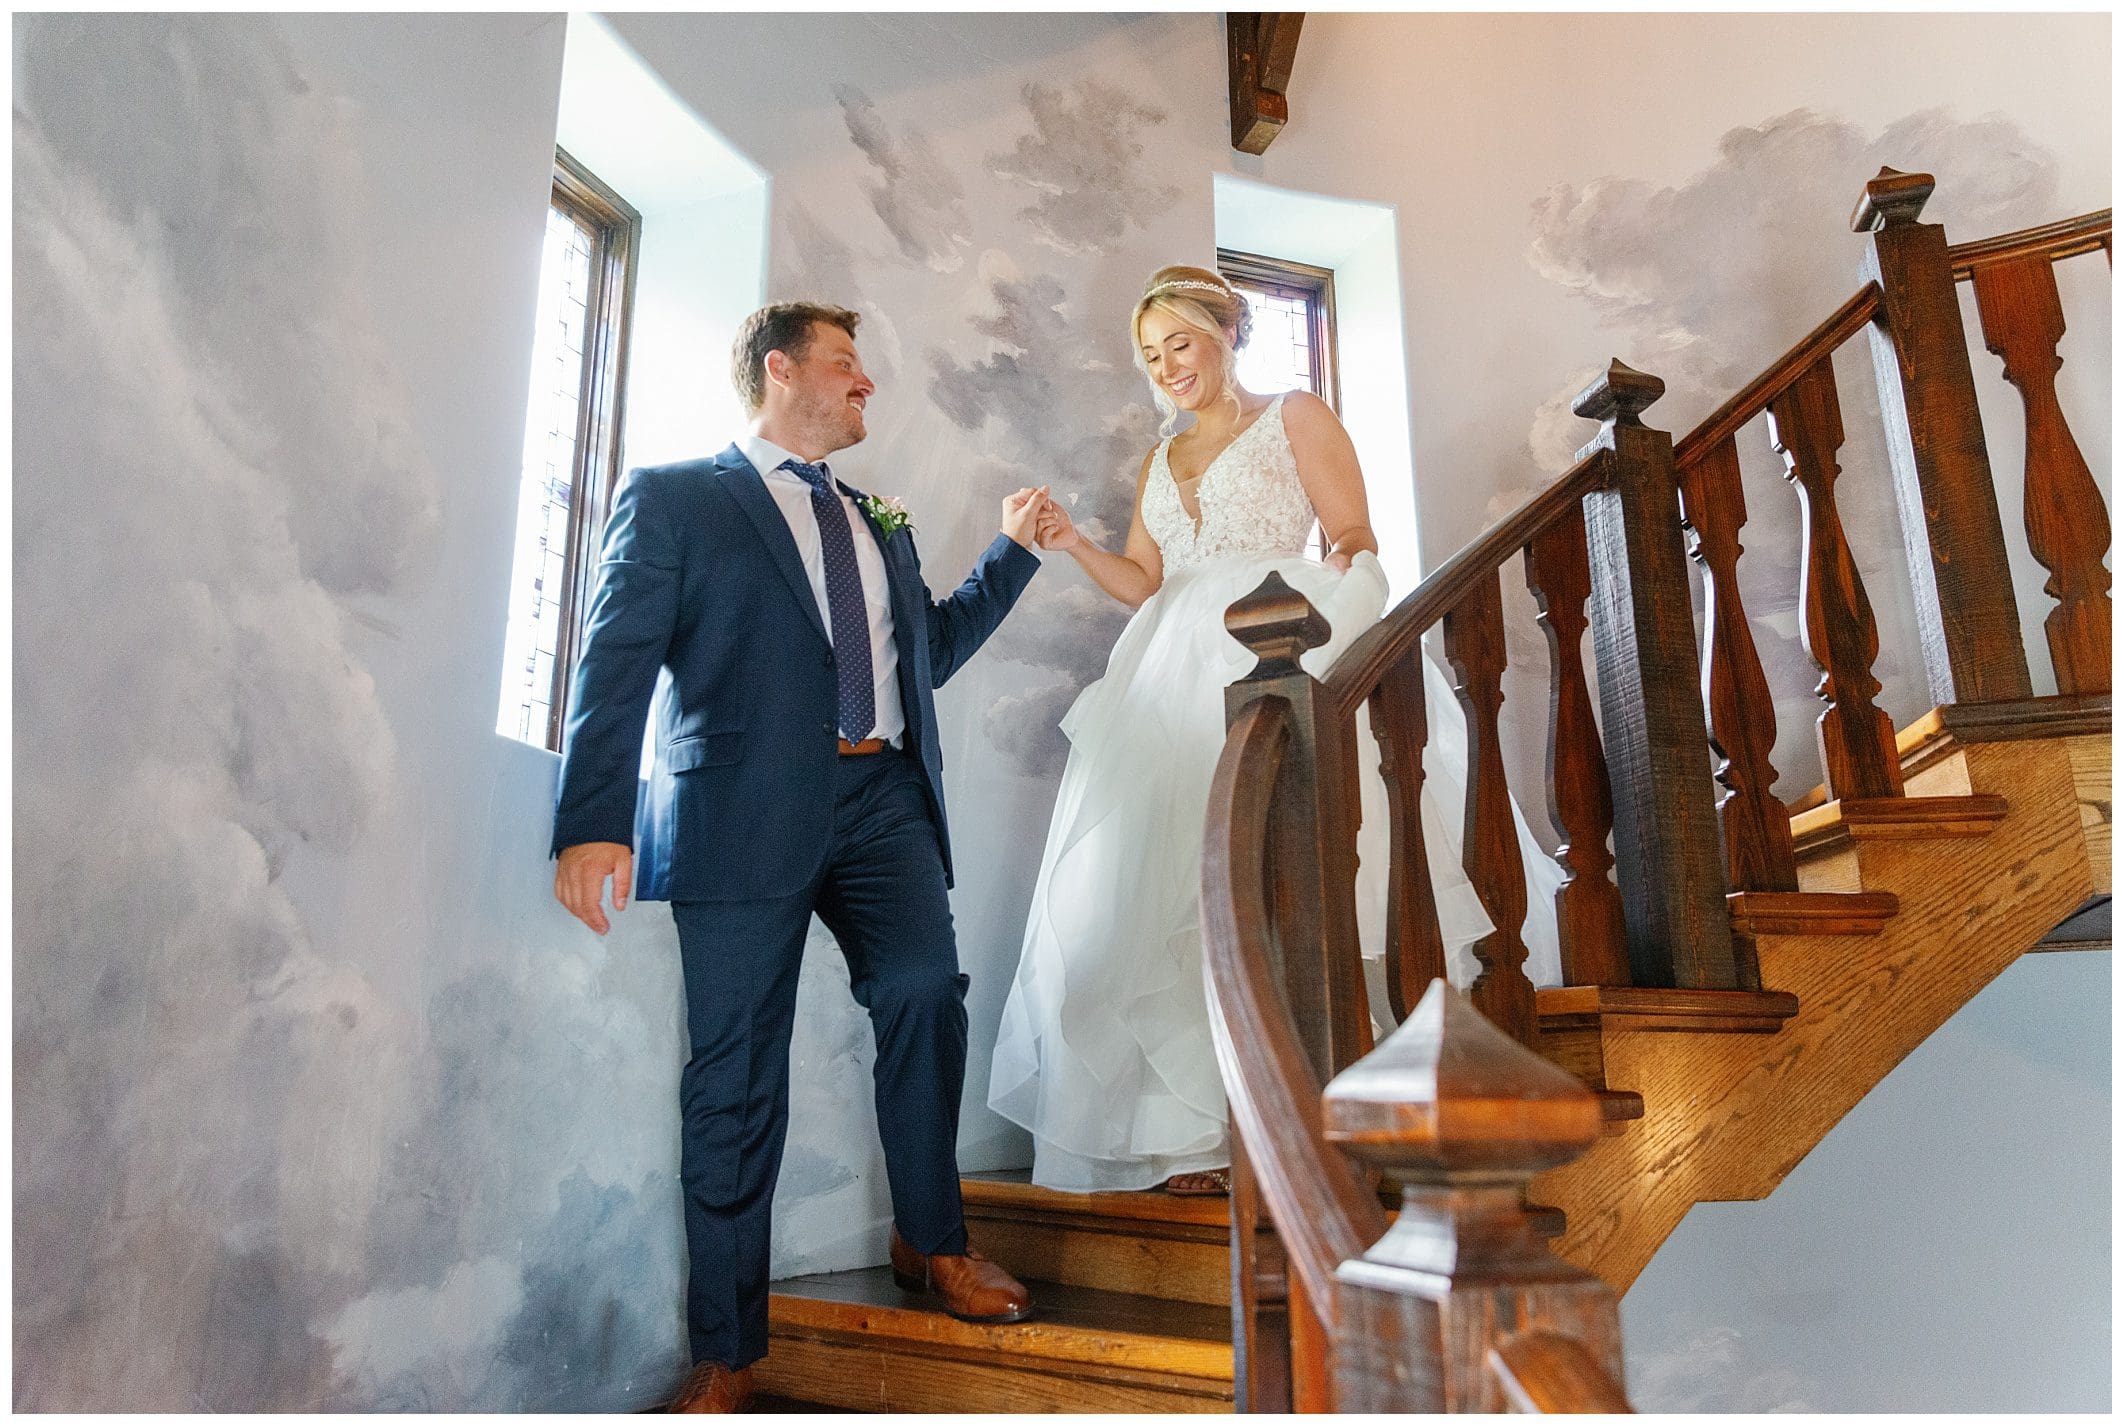 A bride and groom standing on a staircase.